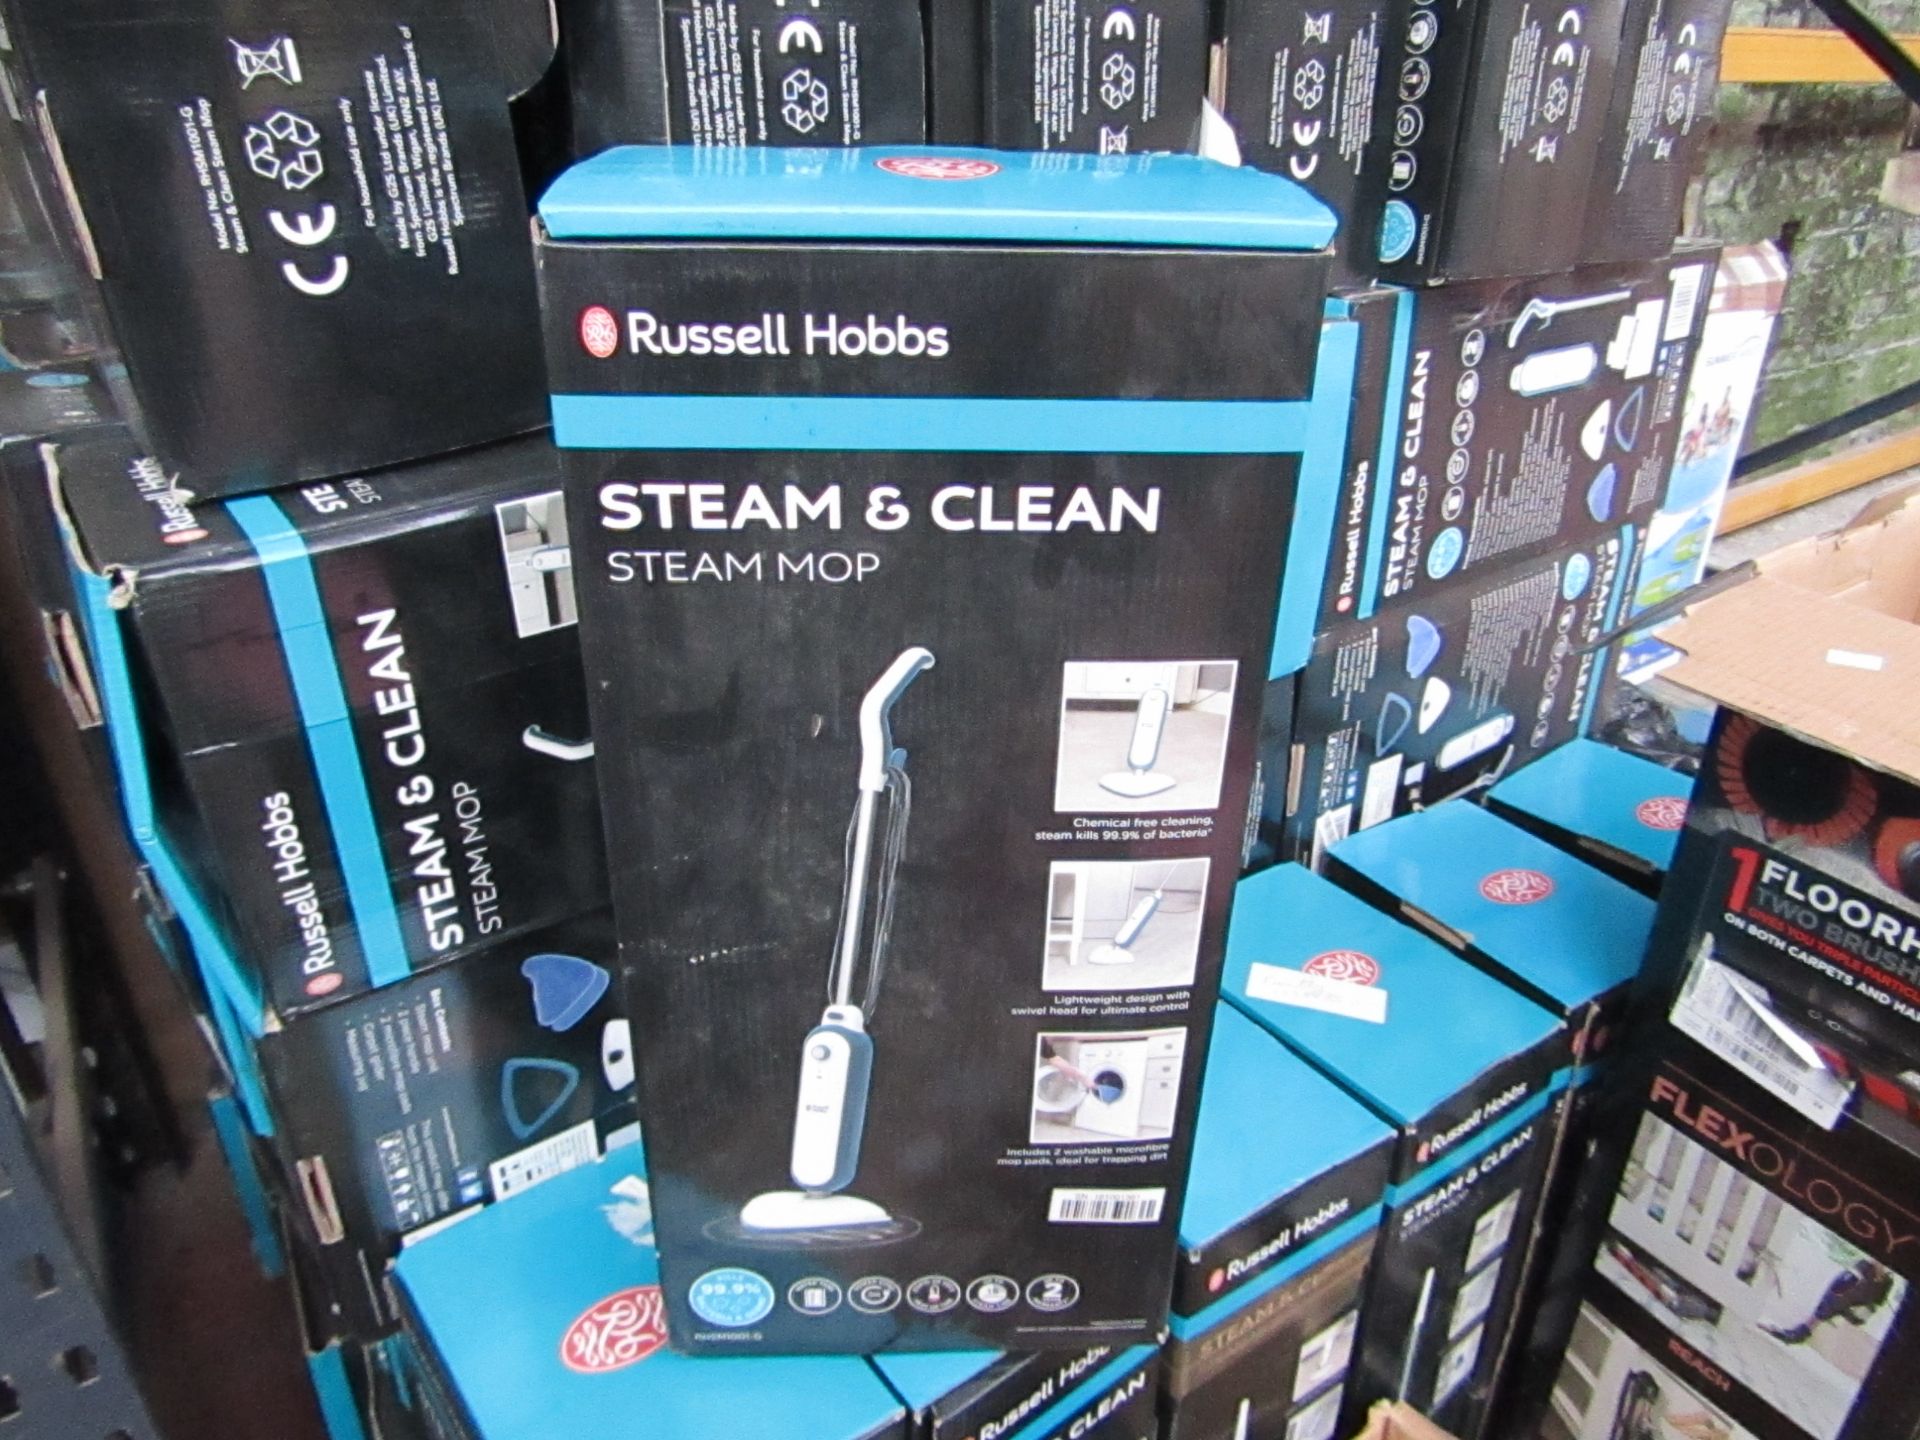 Russell Hobbs Steam and Clean Steam Mop, boxed and Unchecked.